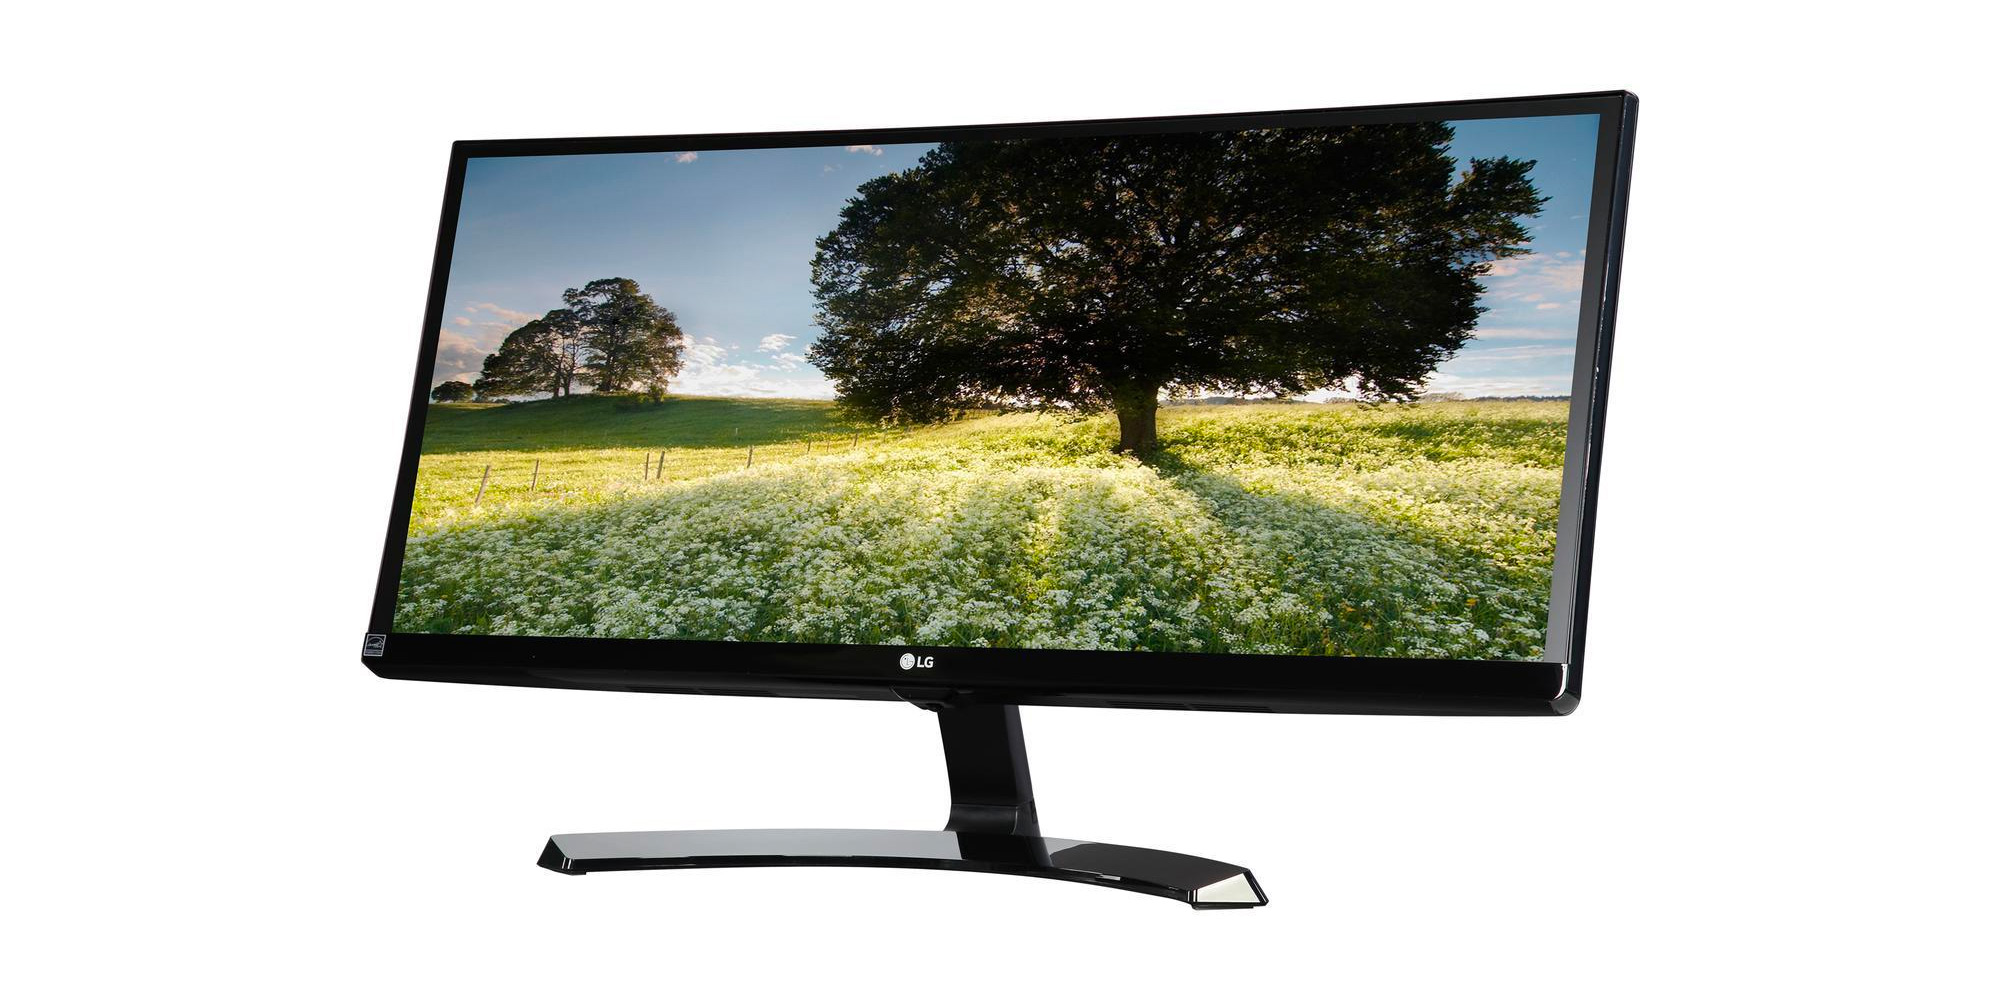 LG's 29-inch ultrawide monitor is a great workstation companion at $210